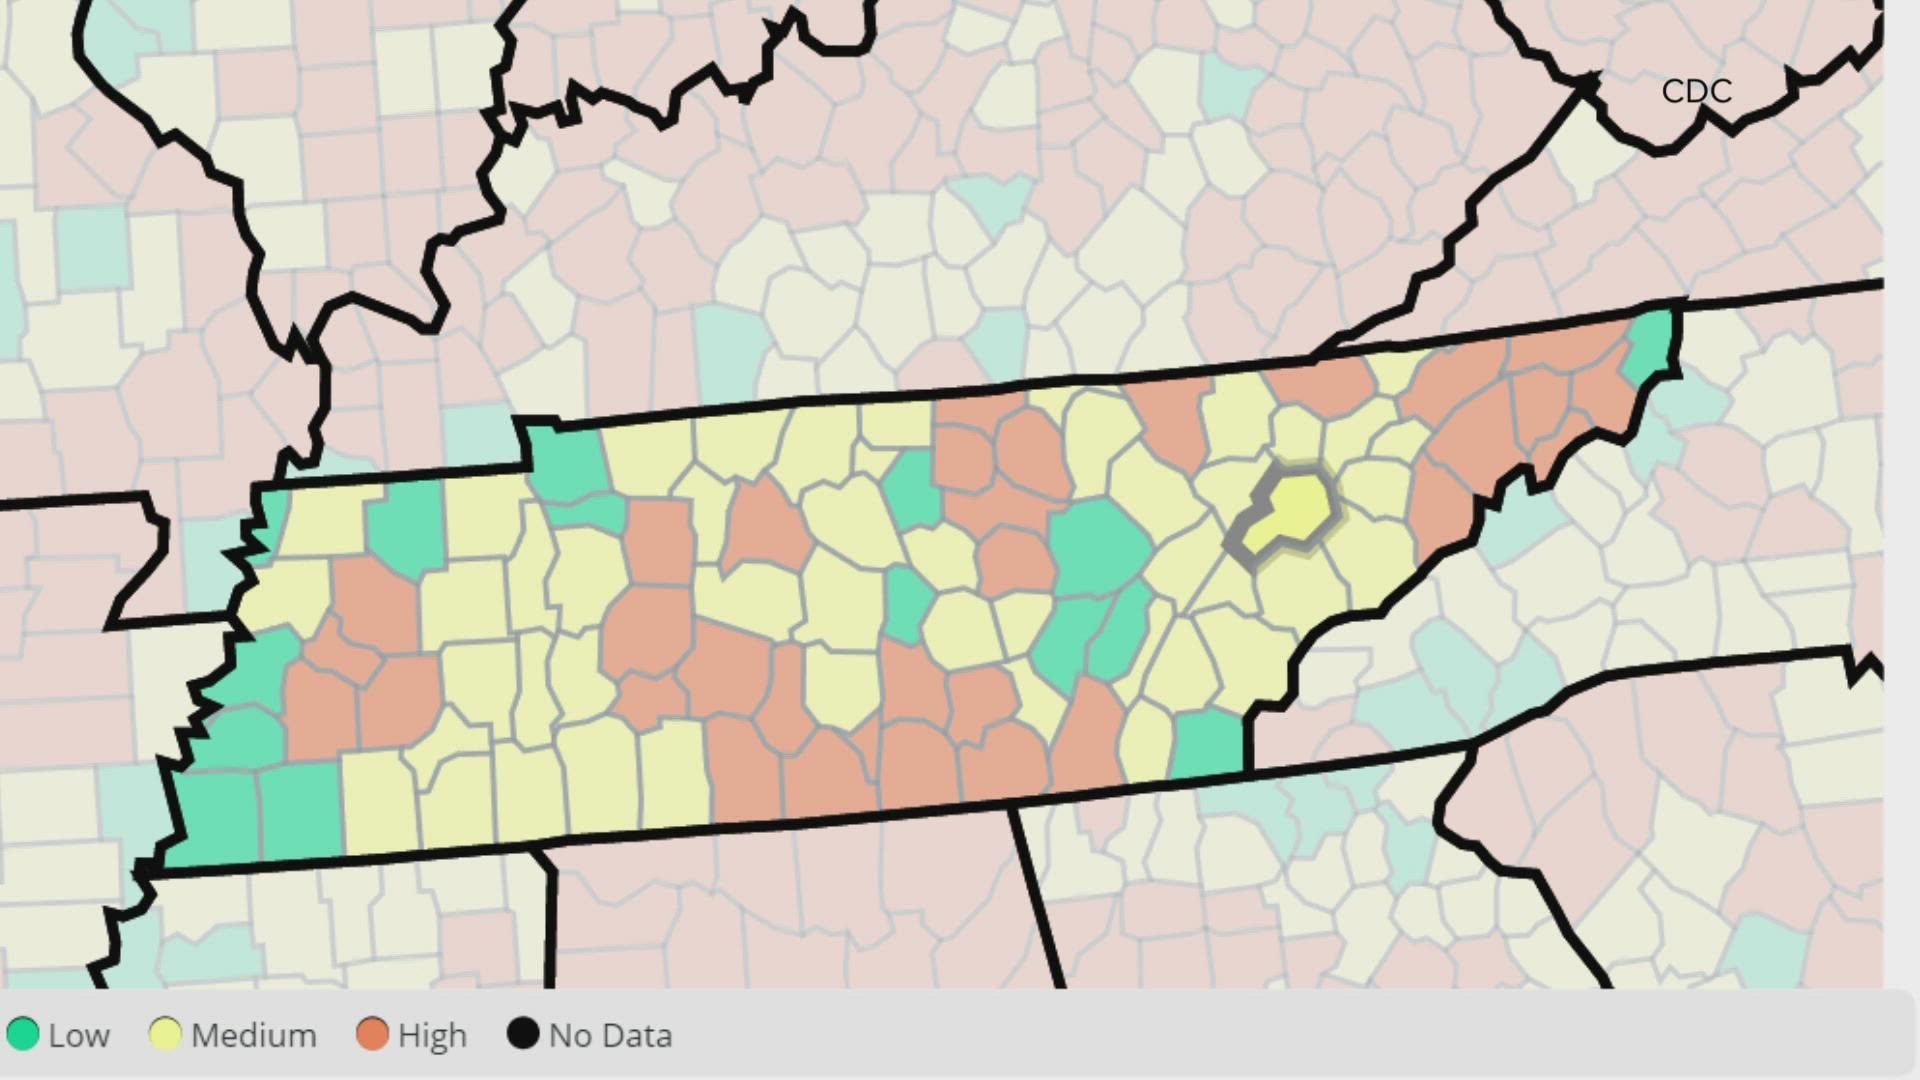 The latest CDC numbers show COVID-19 numbers across several counties across east Tennessee dropping.